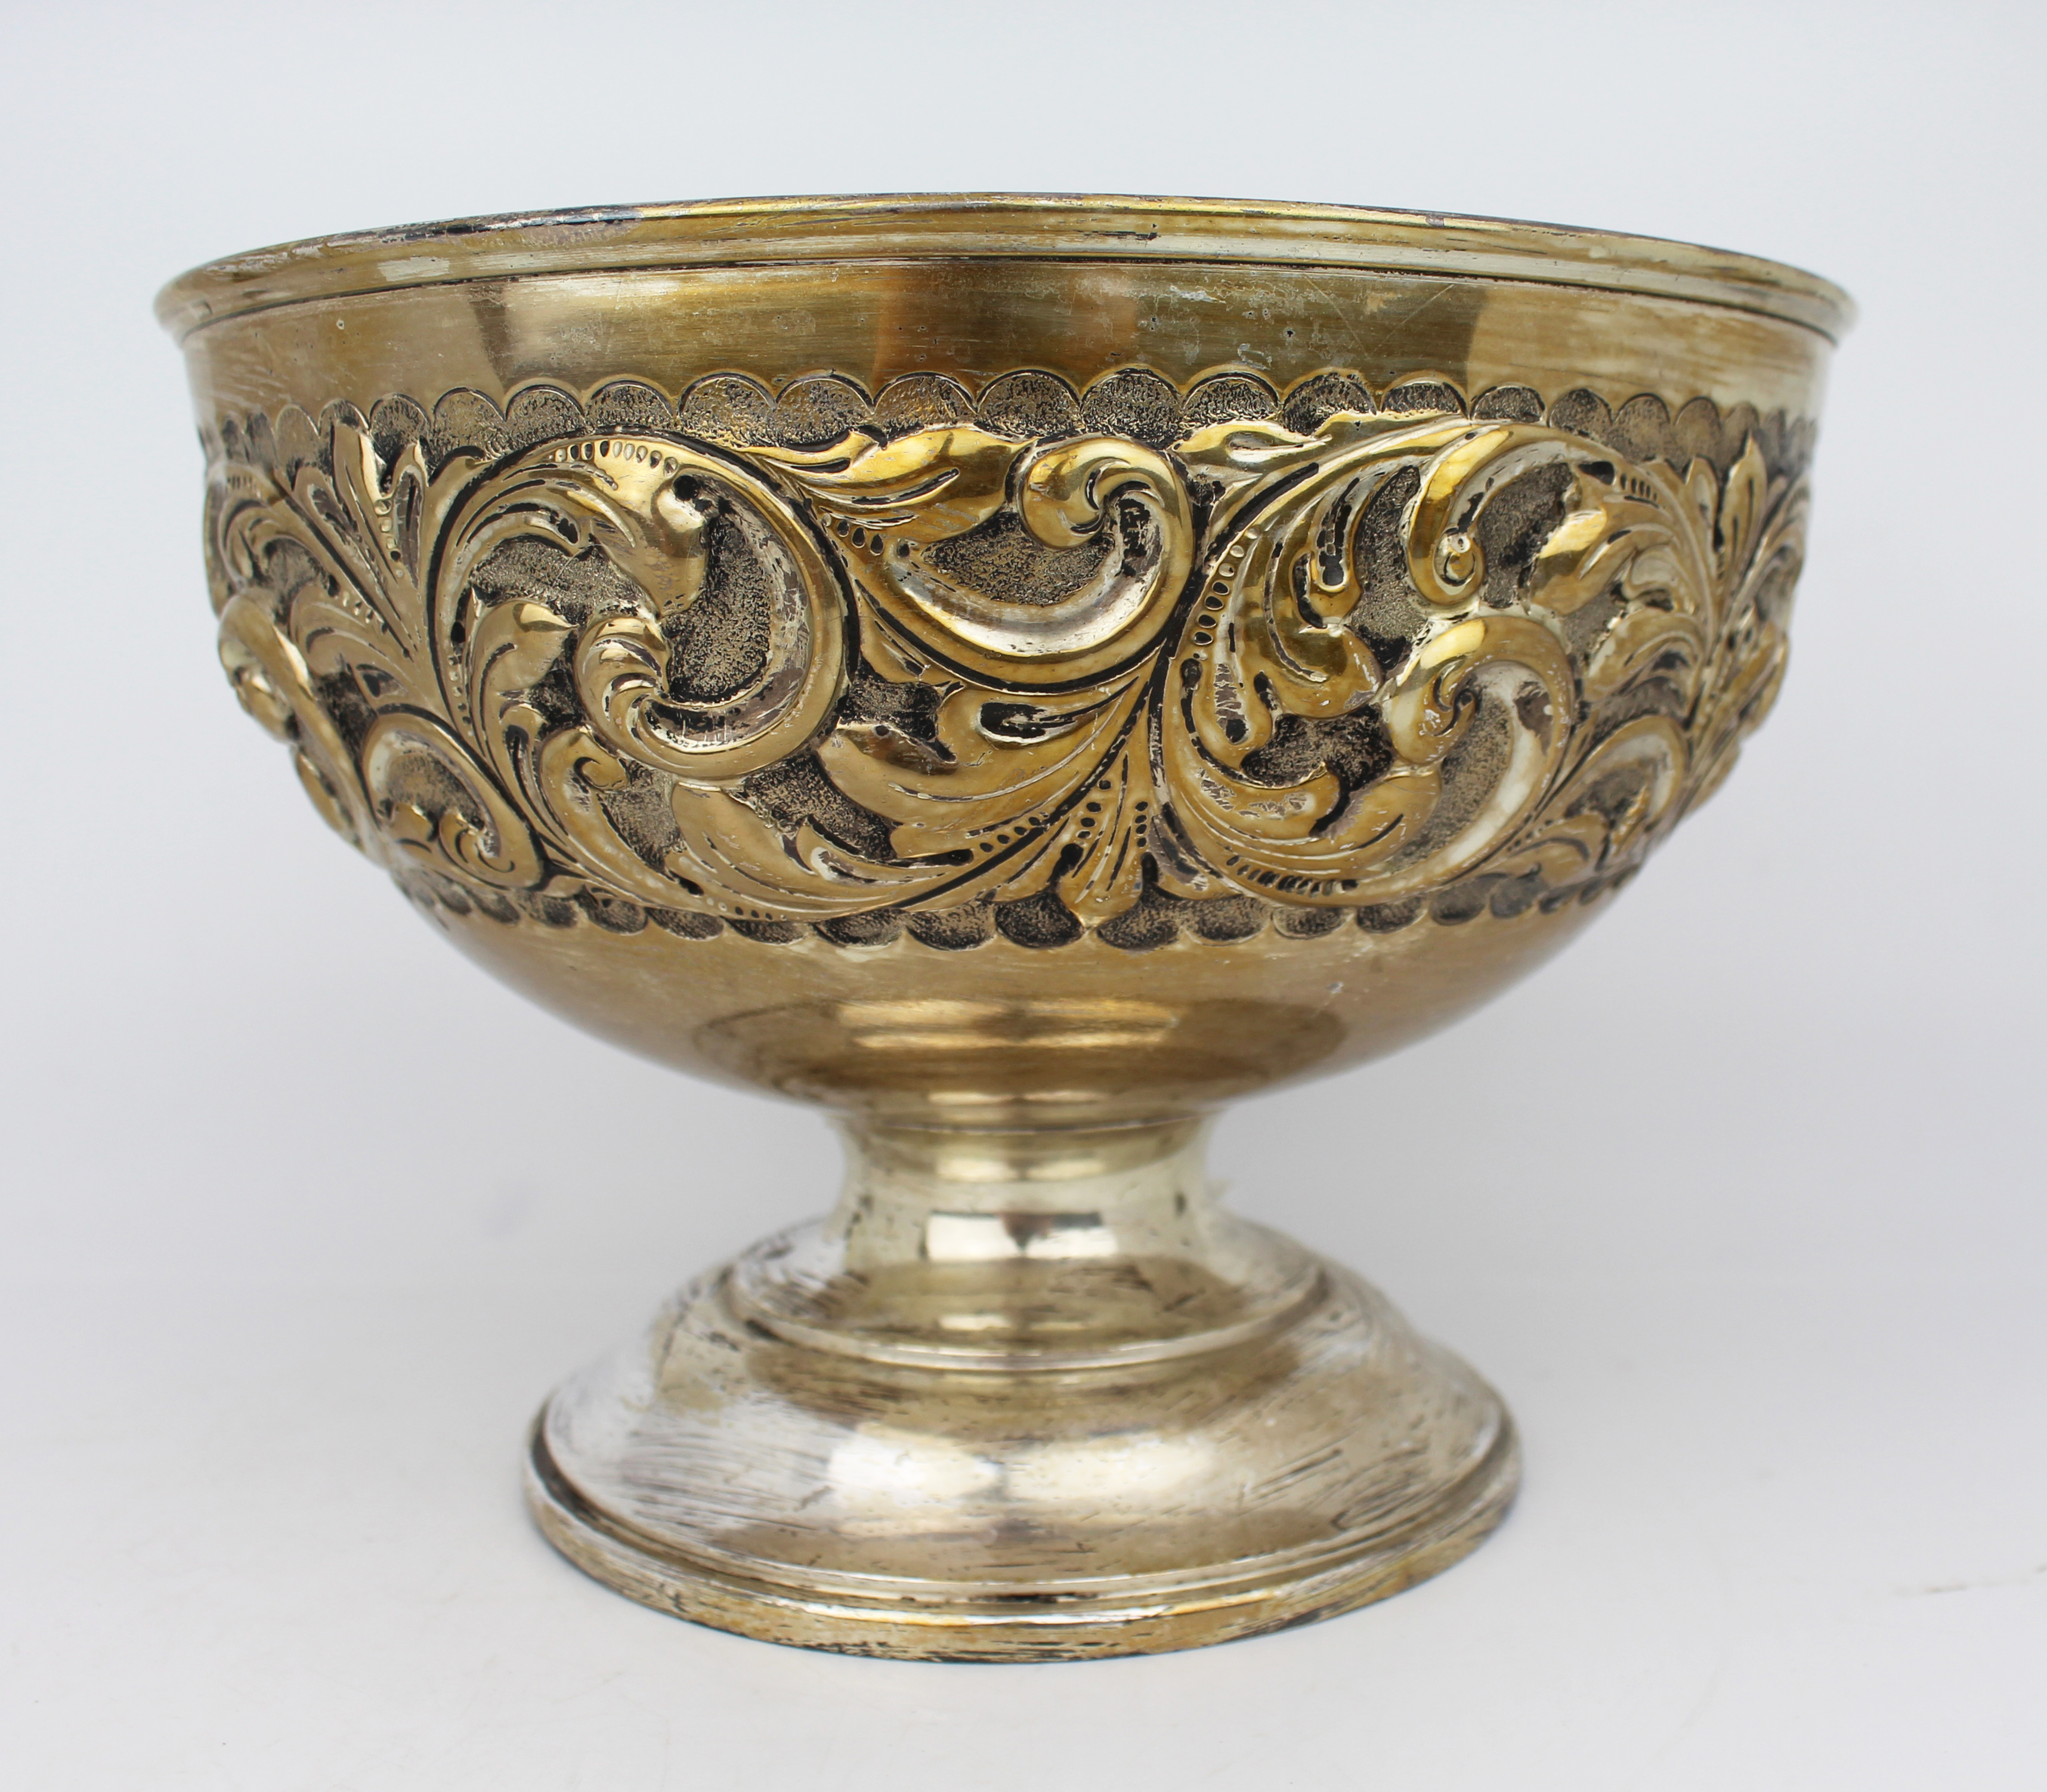 Edwardian Solid Silver Bowl London 1901 - Image 4 of 5